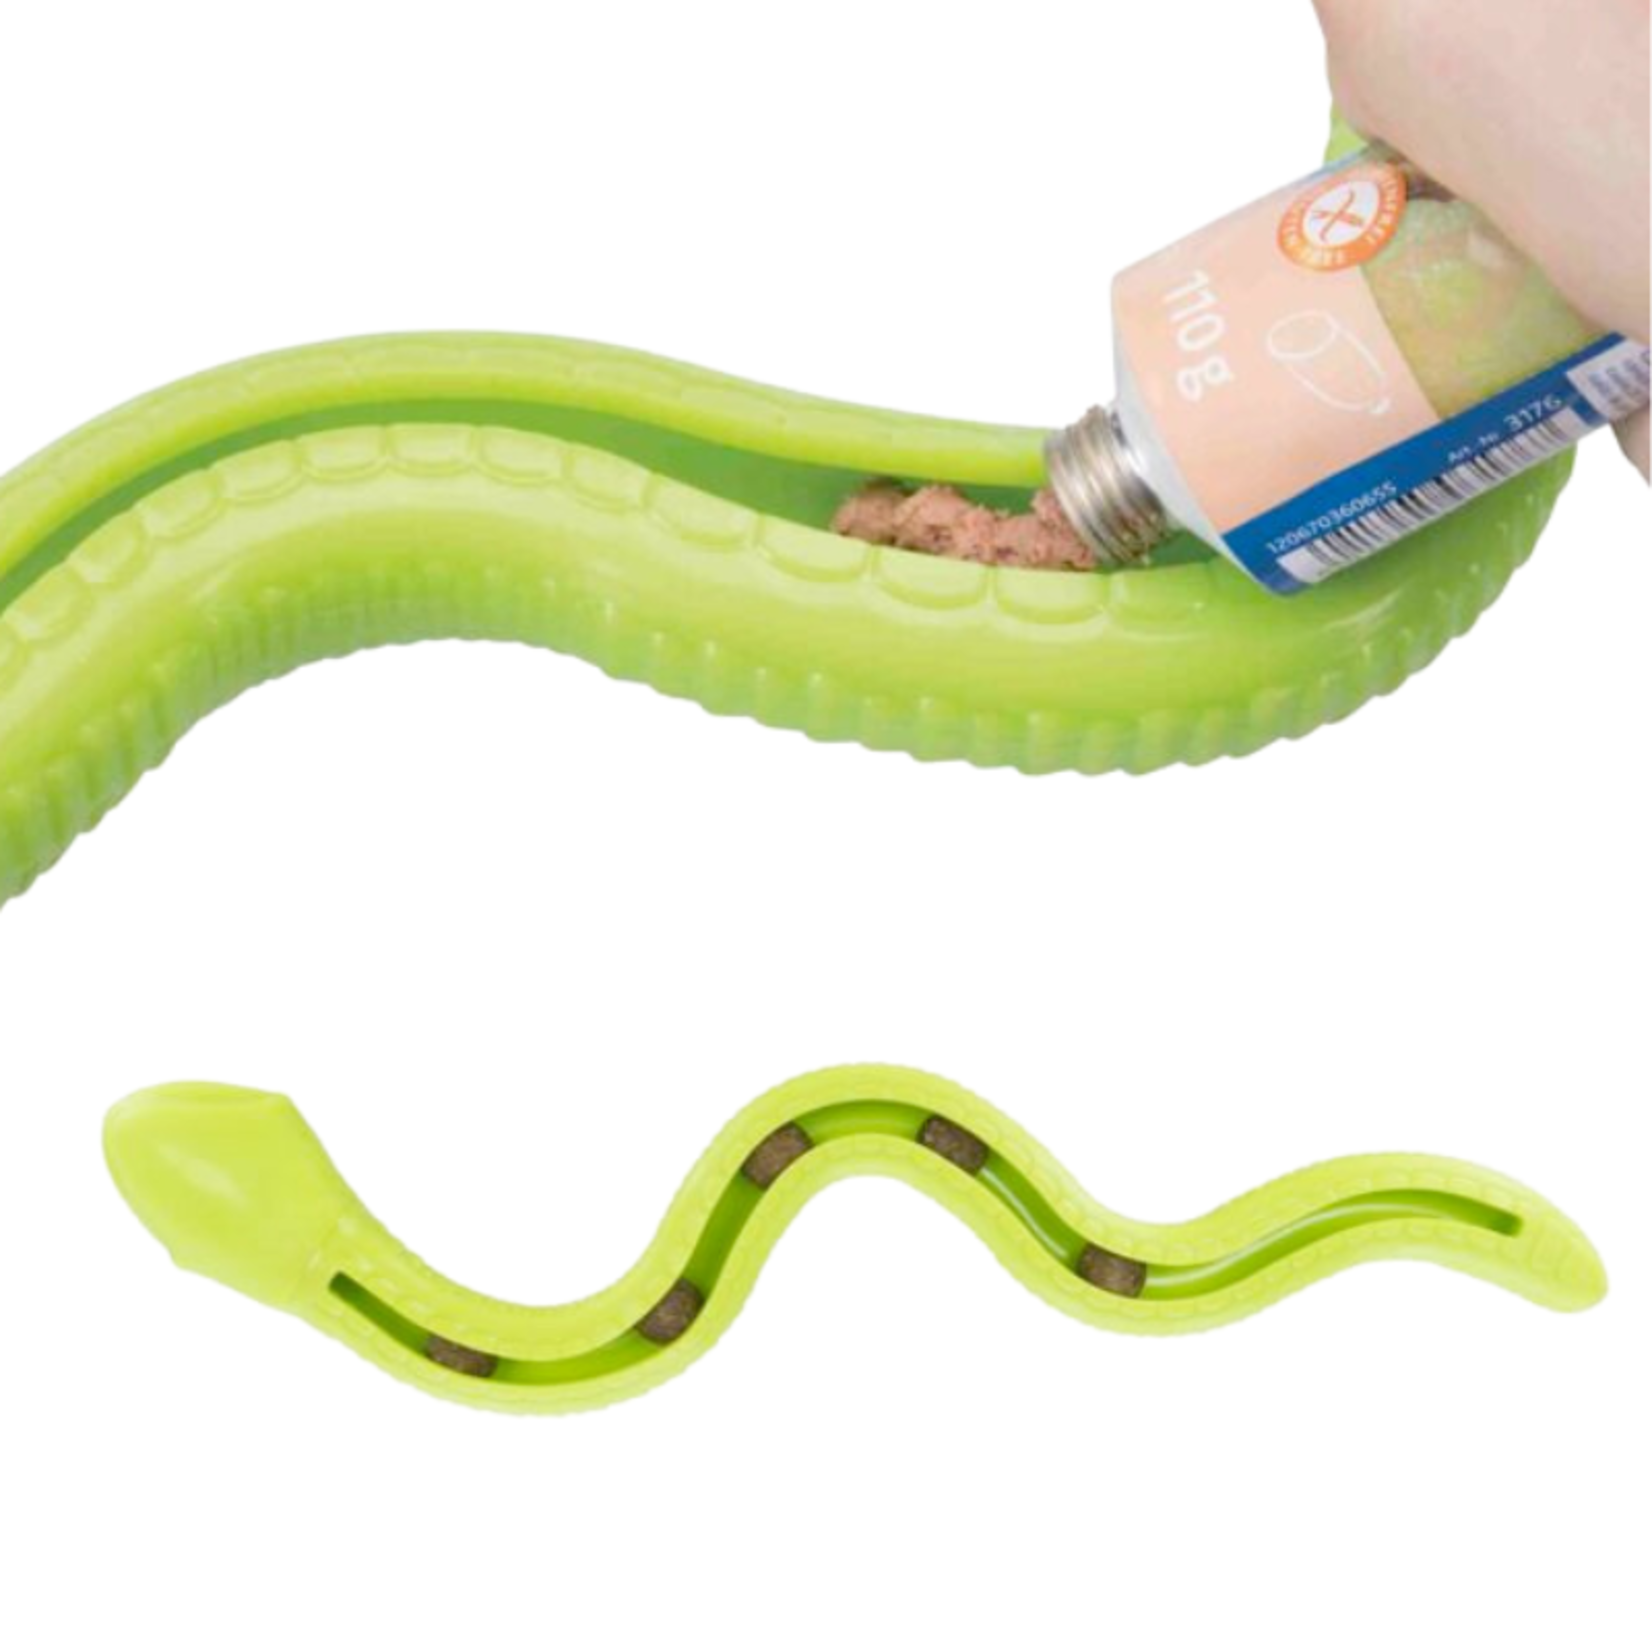 Trixie Squiggly Snake - Stuffable Toy - Trixie